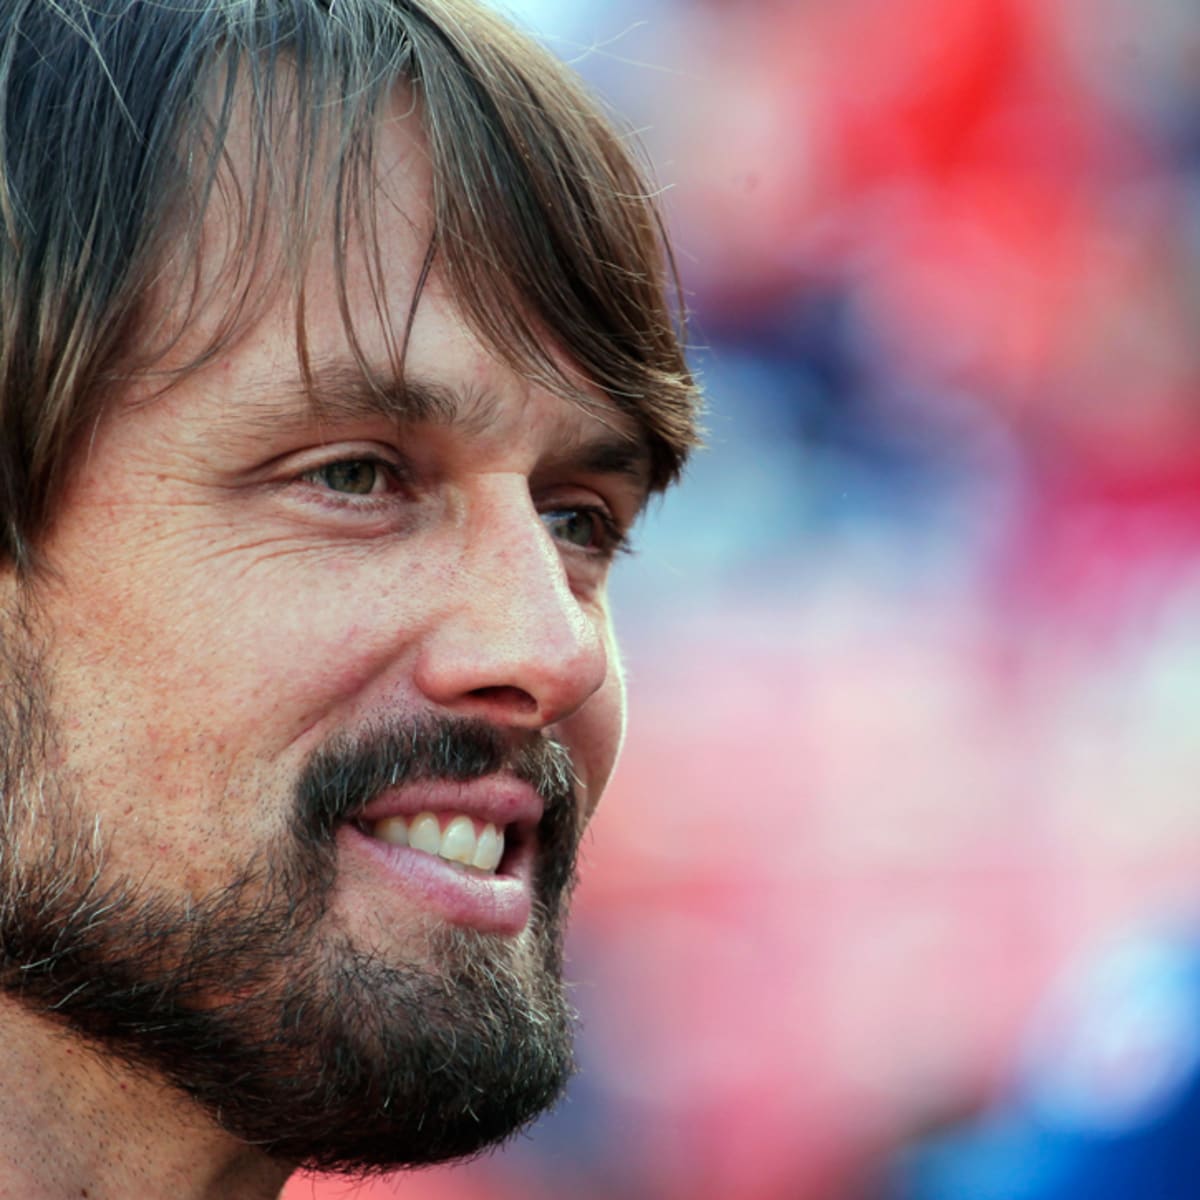 Cannabis Wellness-Promoting Quarterback Jake Plummer to be Honored at  Charity Golf Tournament